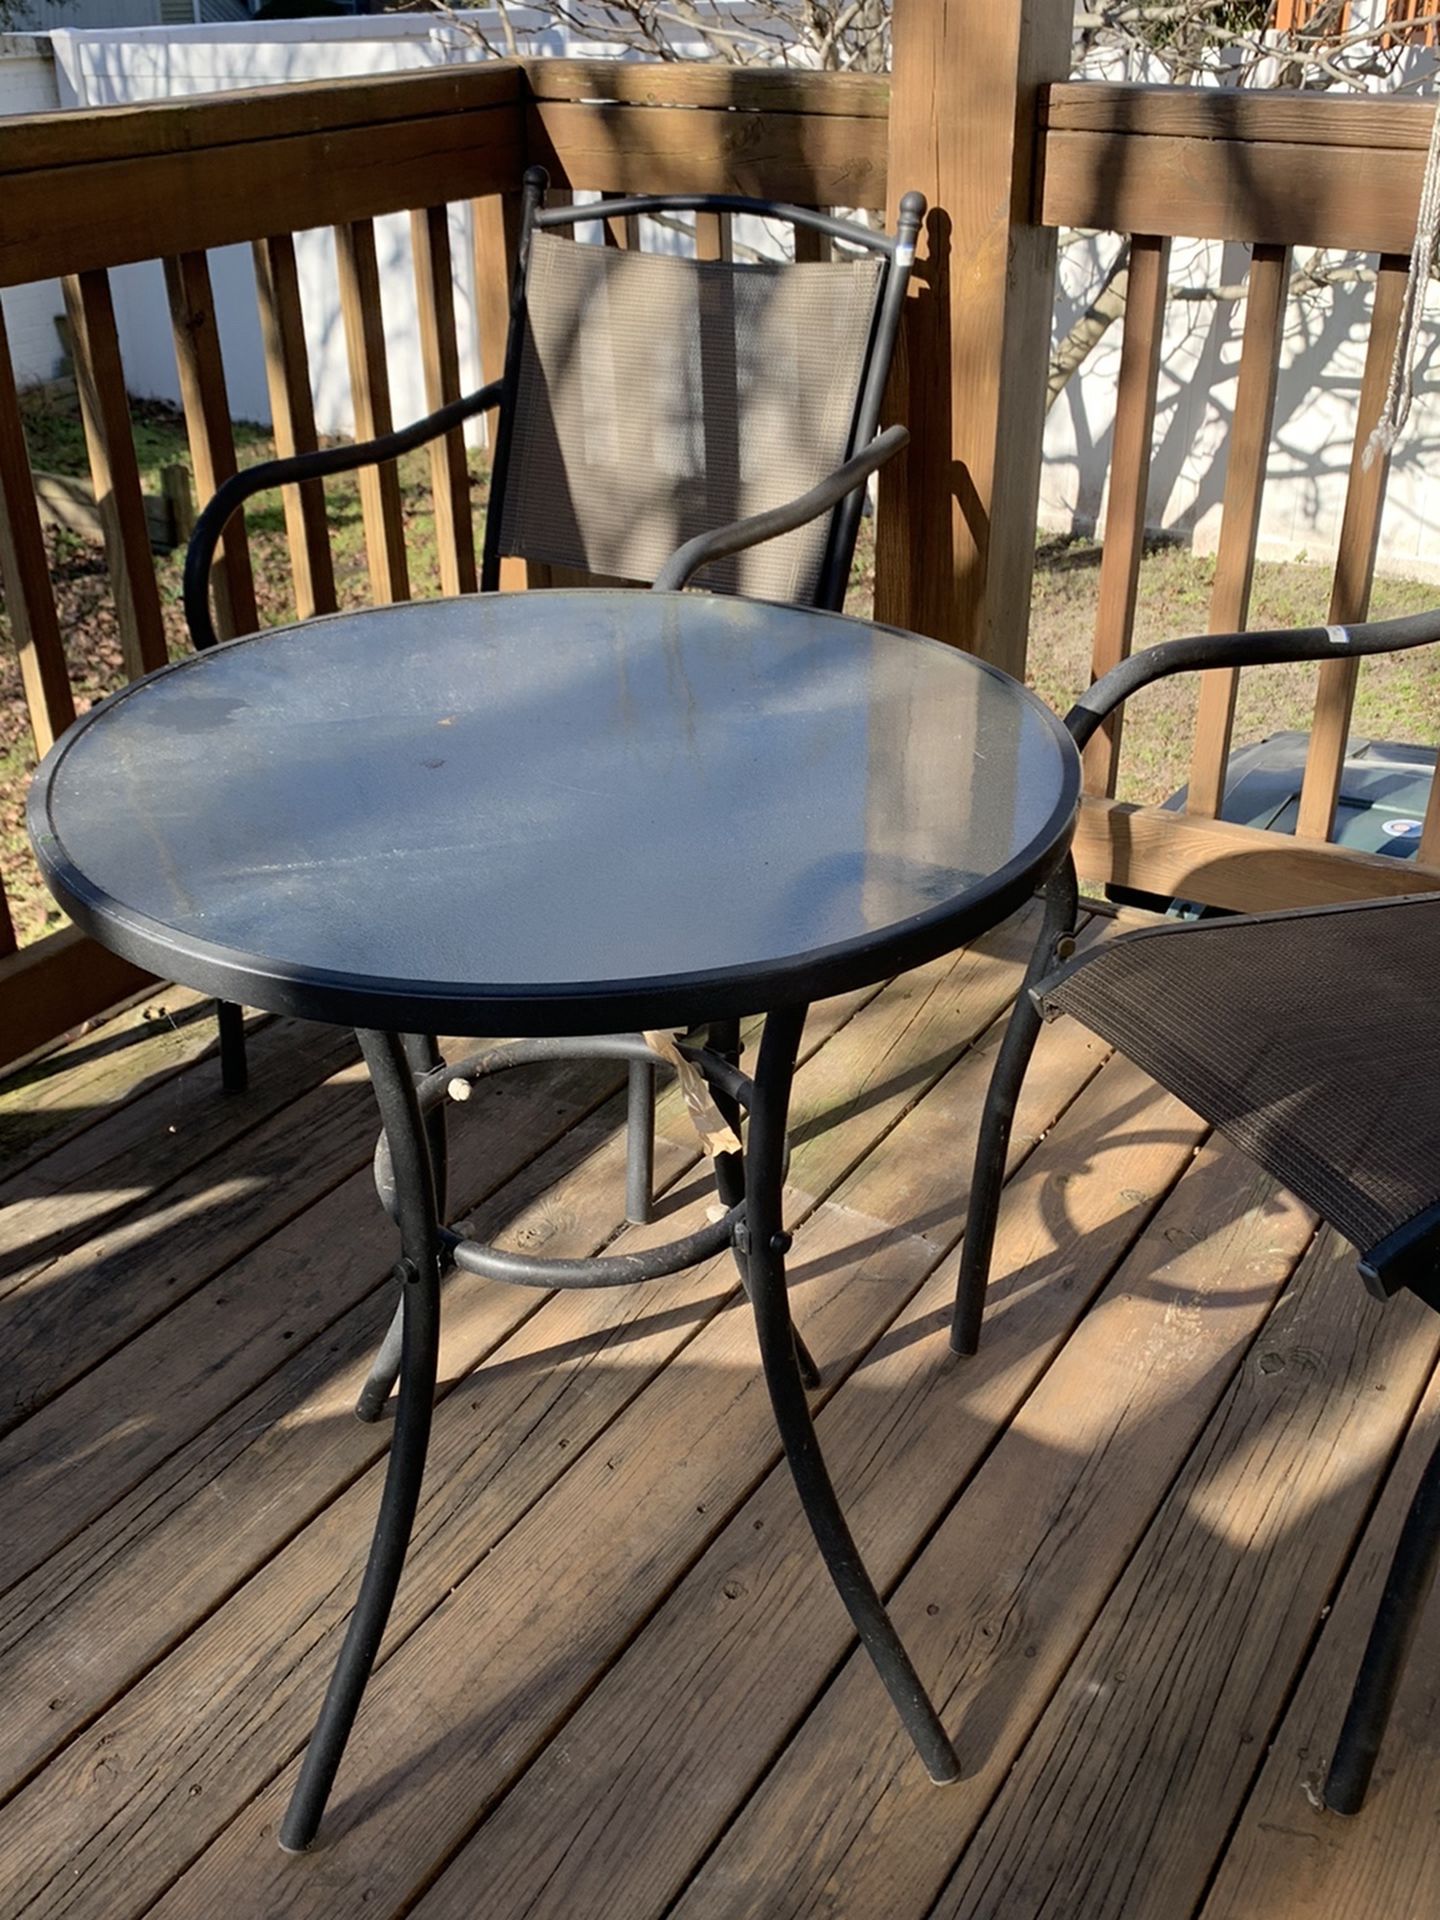 Outdoor patio Furniture and Bar stools